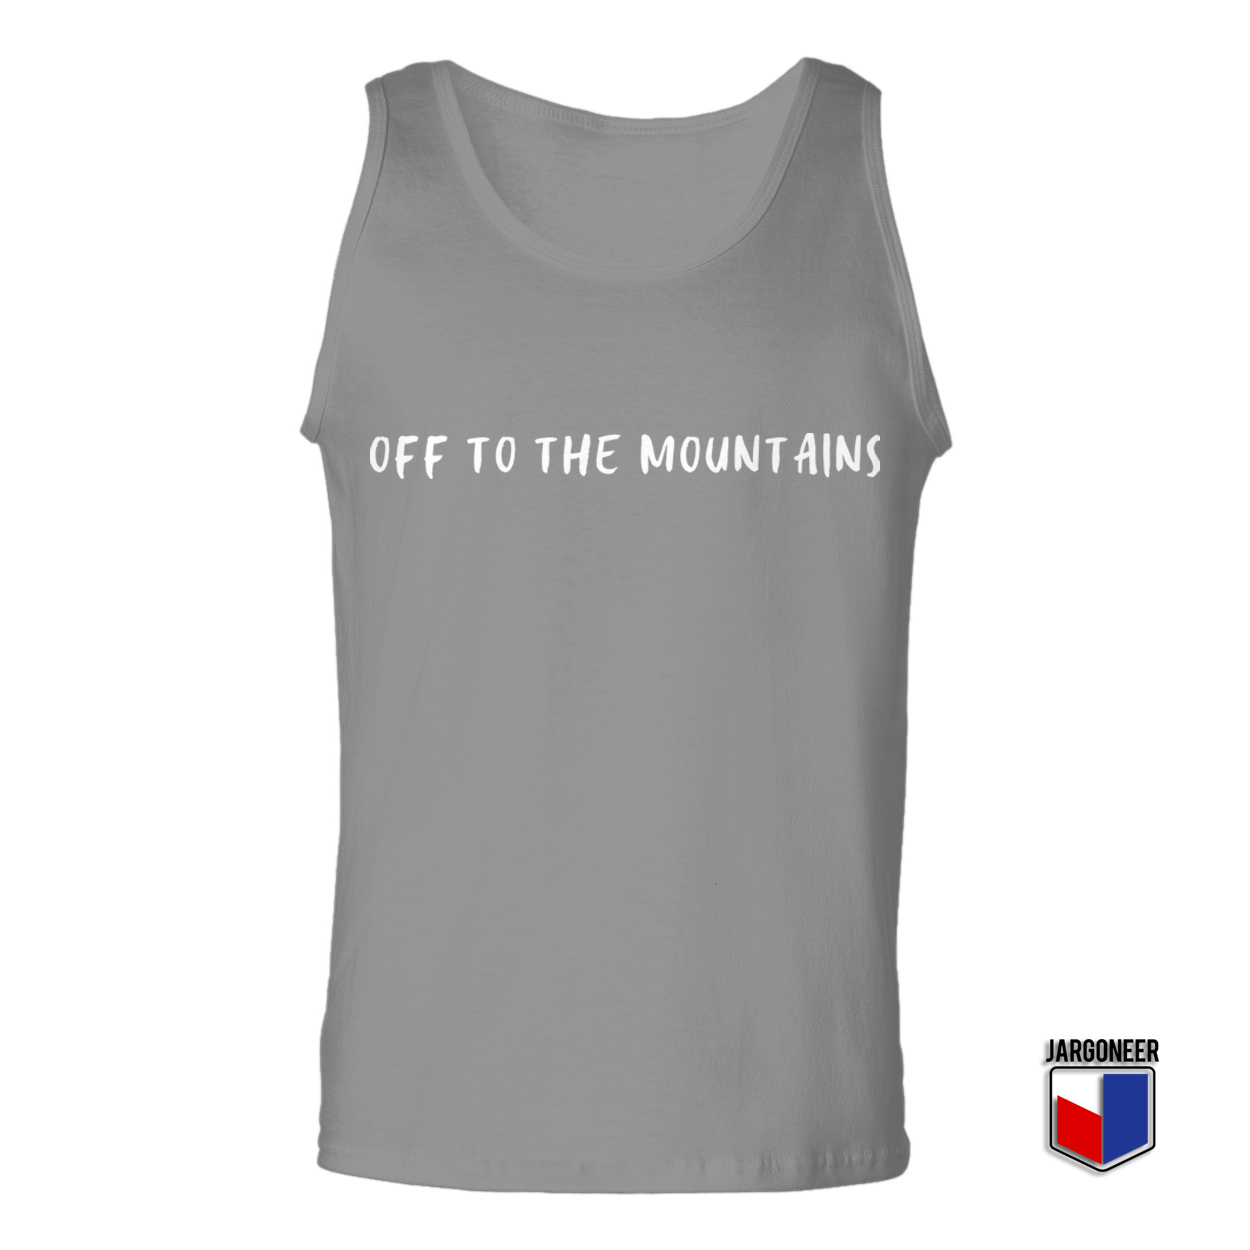 Off To The Mountains Grey Tank Top - Shop Unique Graphic Cool Shirt Designs